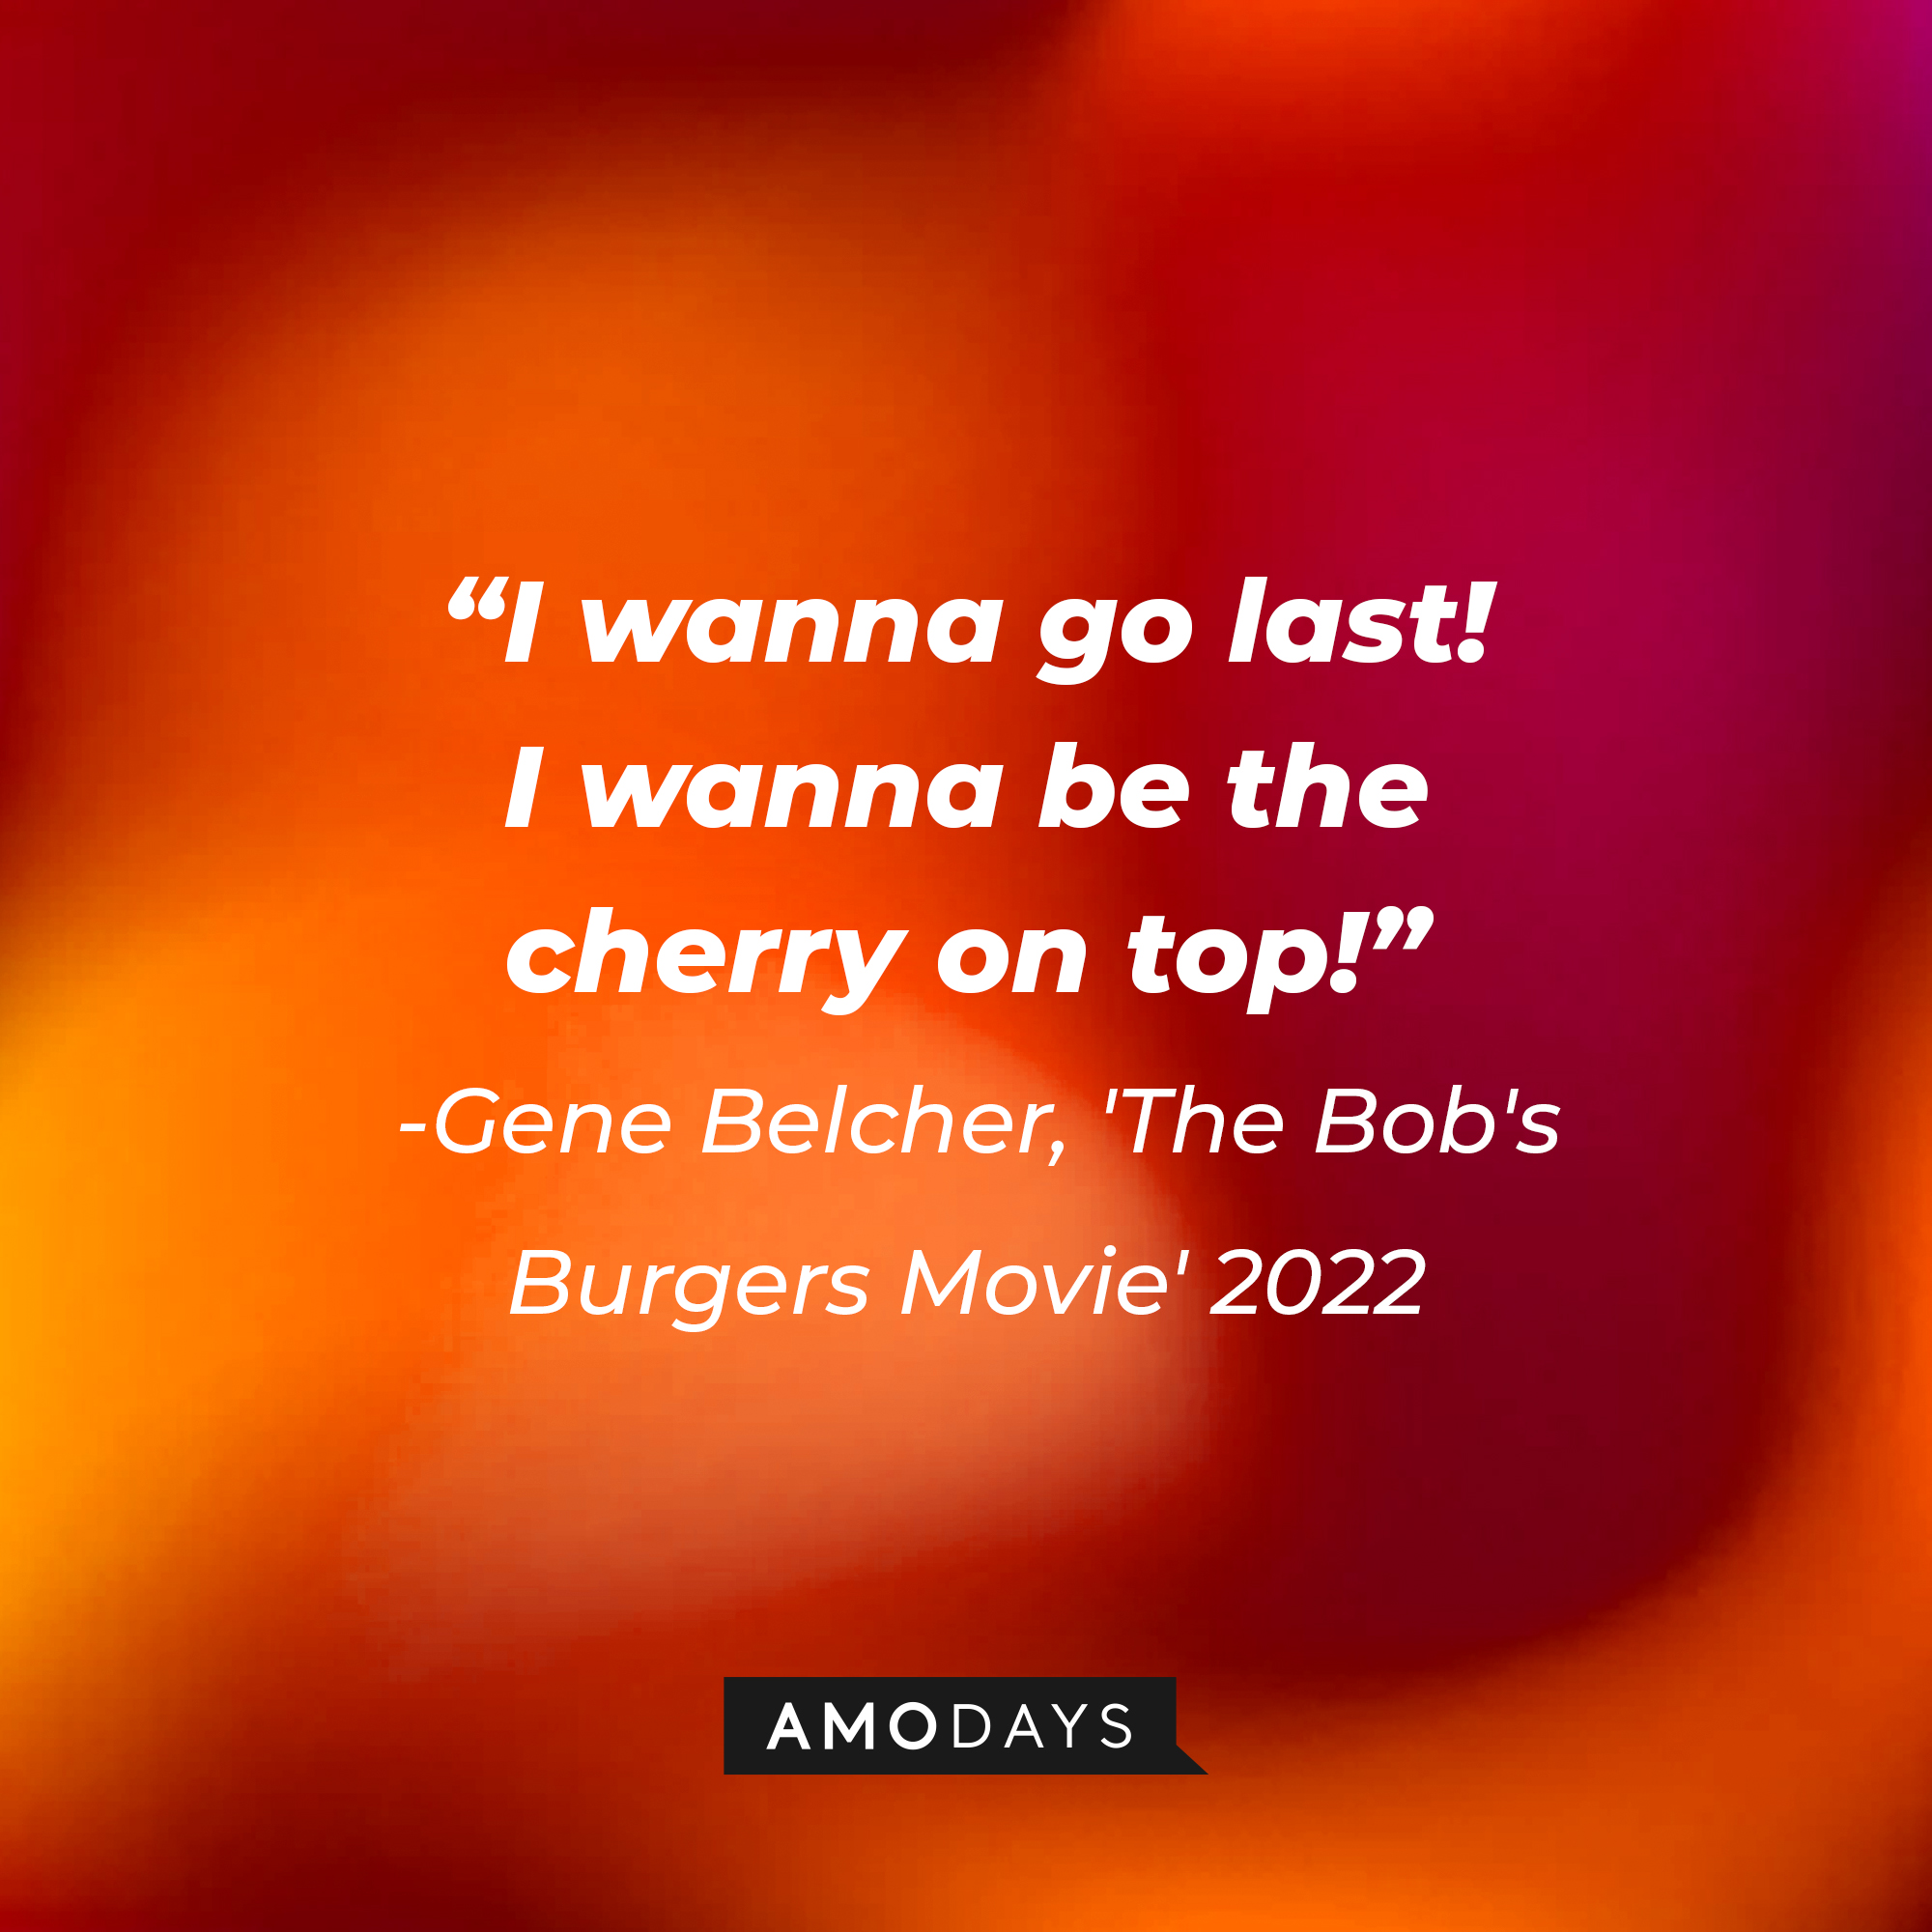 Gene Belcher's quote: "I wanna go last! I wanna be the cherry on top!" | Source: Amodays